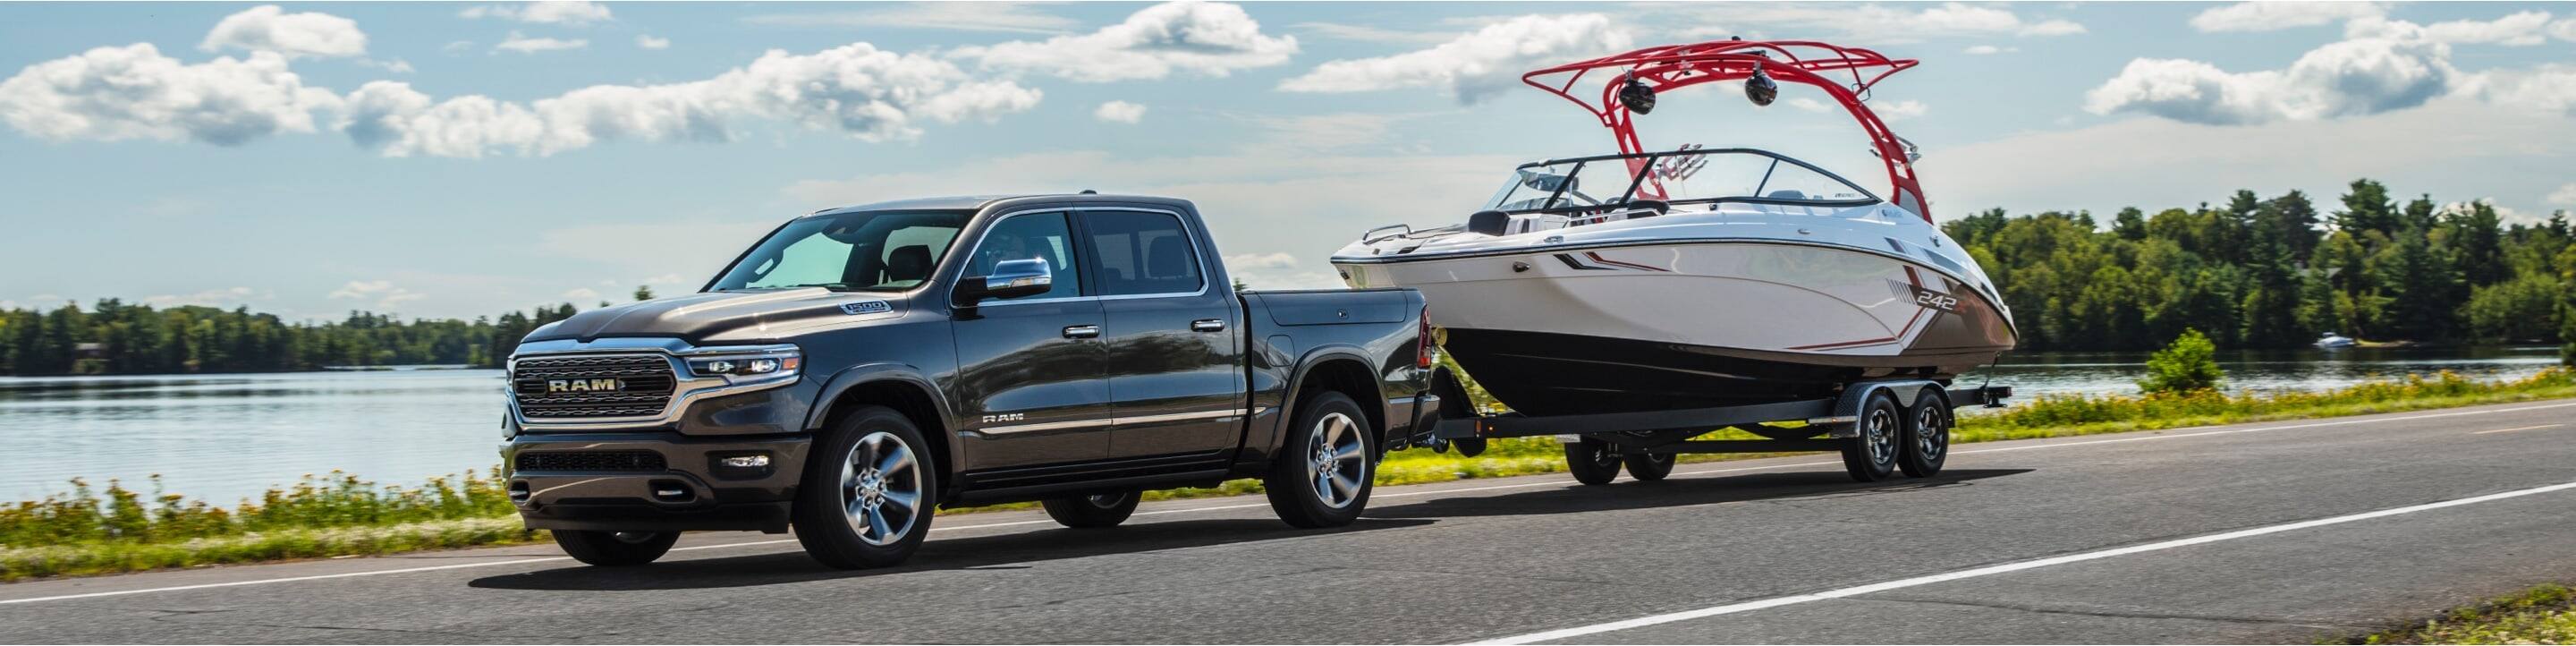 A 2021 Ram 1500 towing a boat and being driven on a highway next to a body of water.